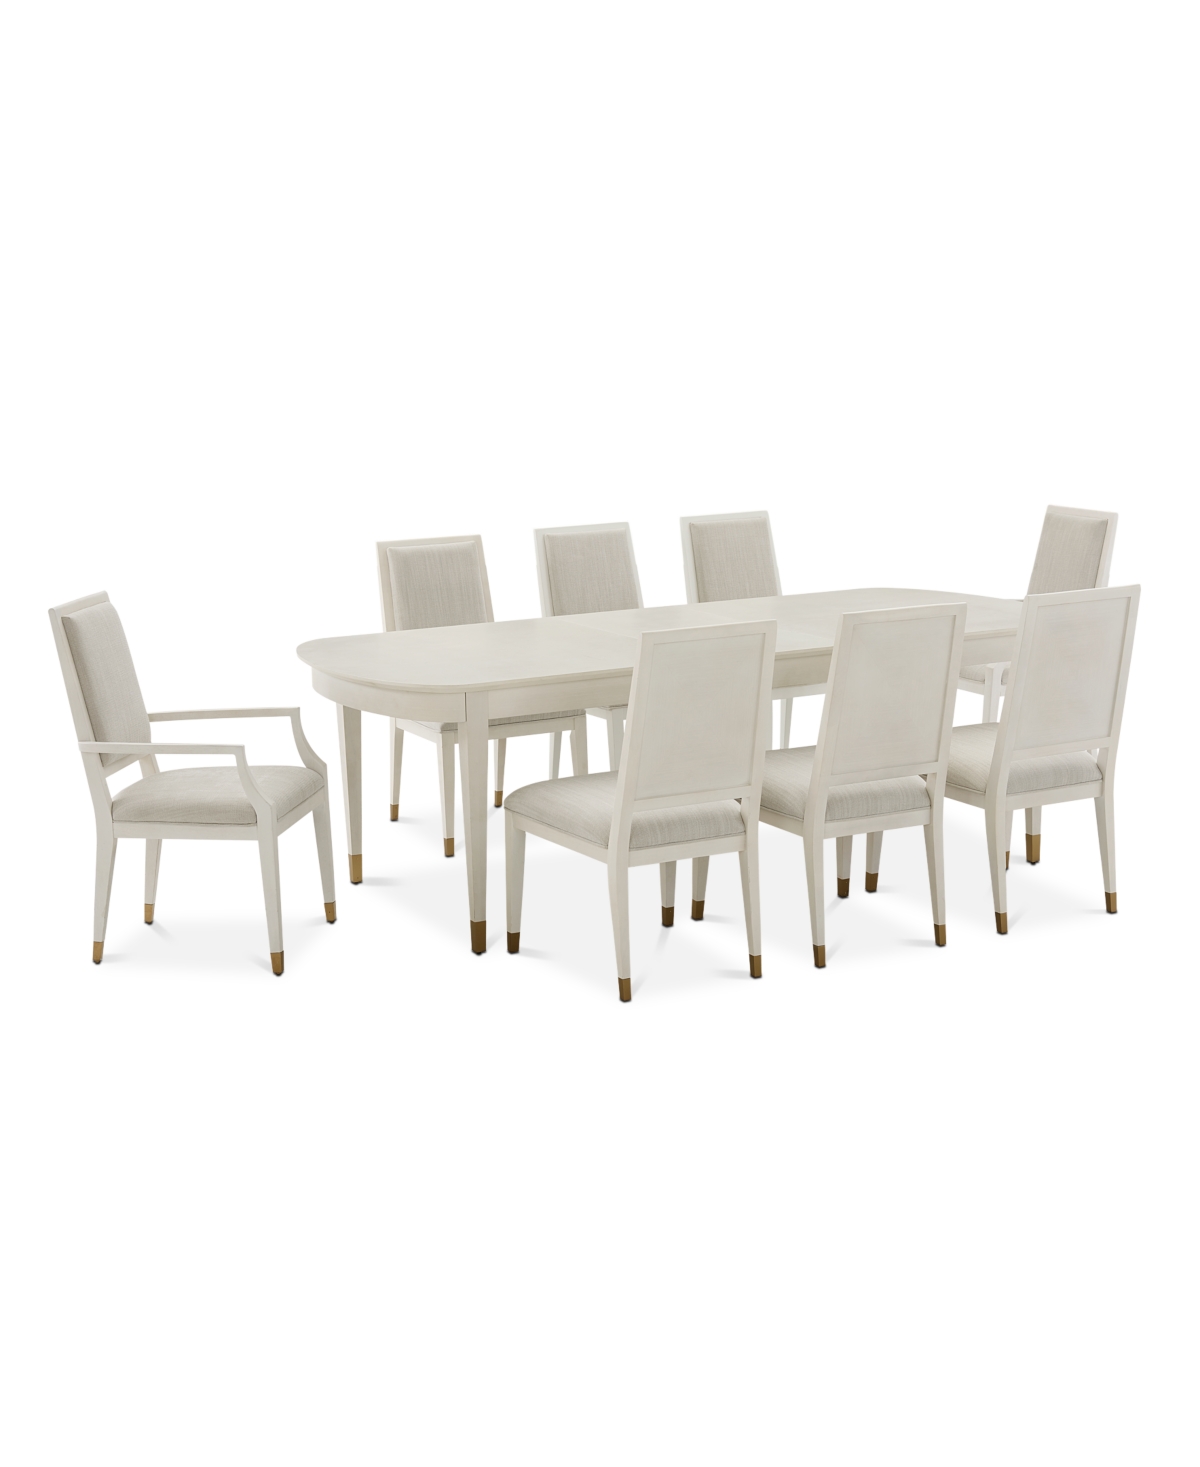 Miranda Kerr 9pc Dining Set(Table, 6 Side Chairs, & 2 Arm Chairs)